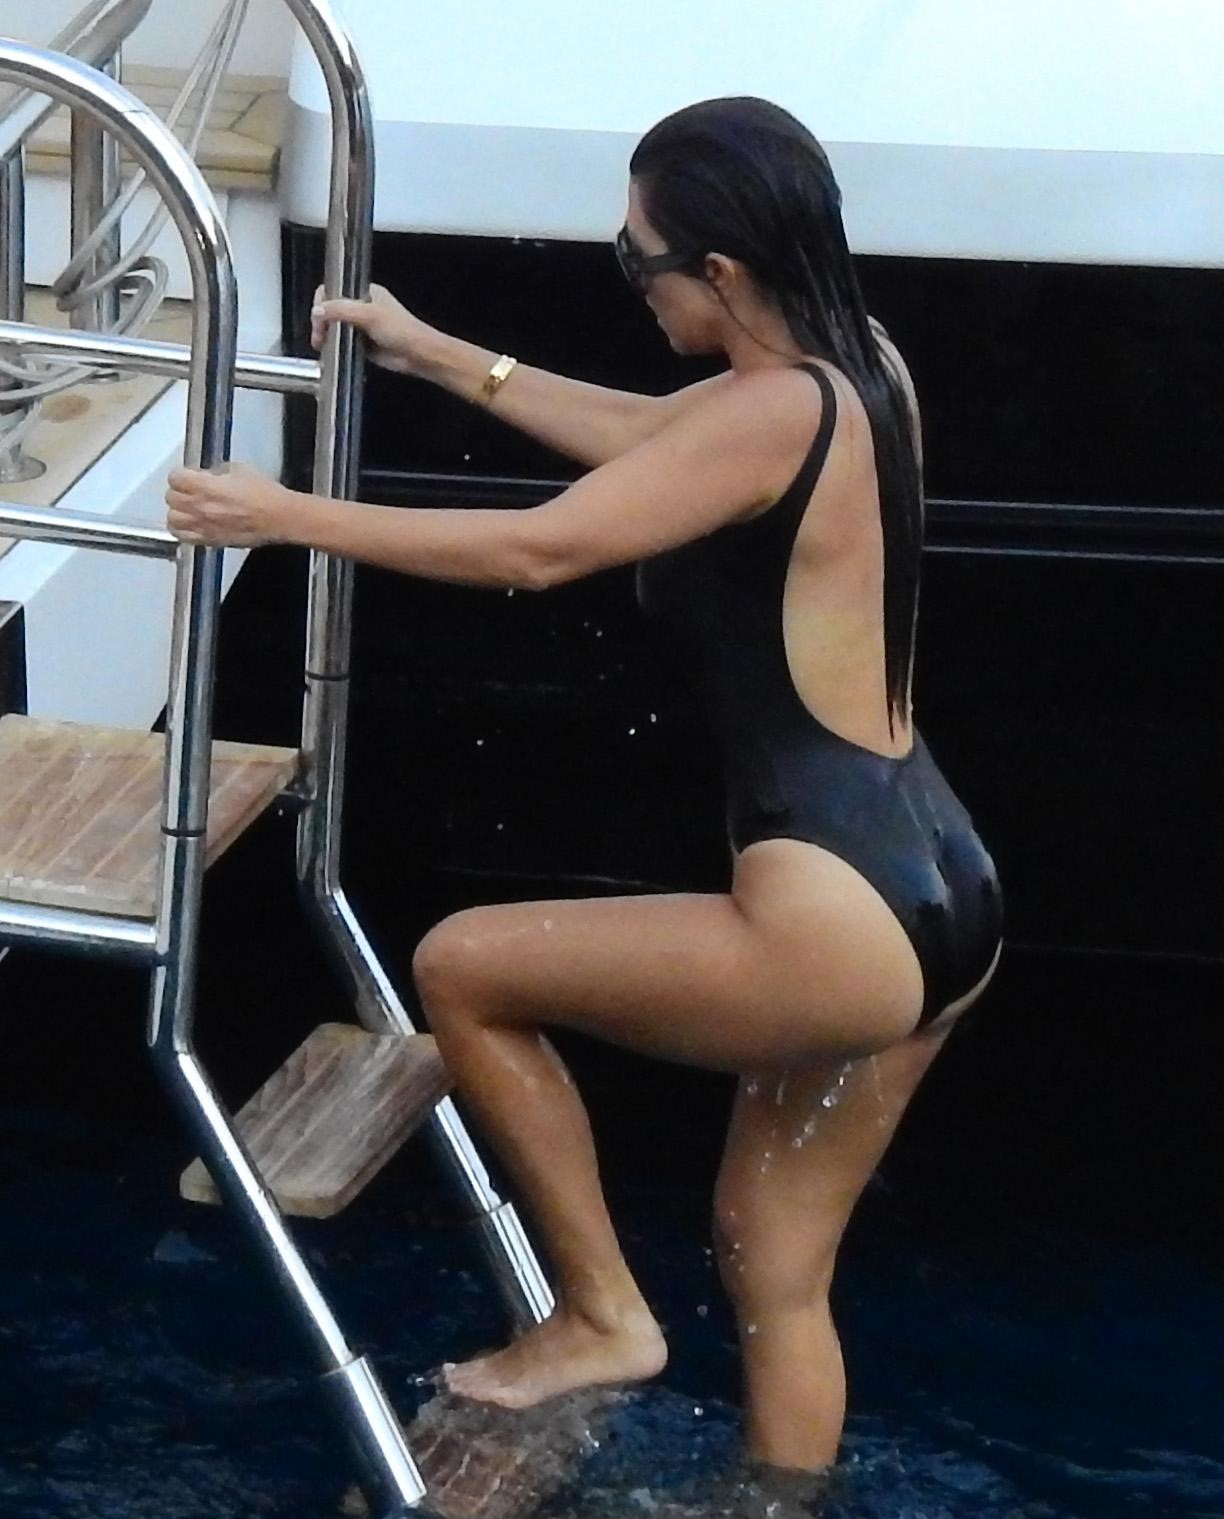 Free porn pics of Kourtney Kardashian - Another Expensive Swimsuit 12 of 13 pics